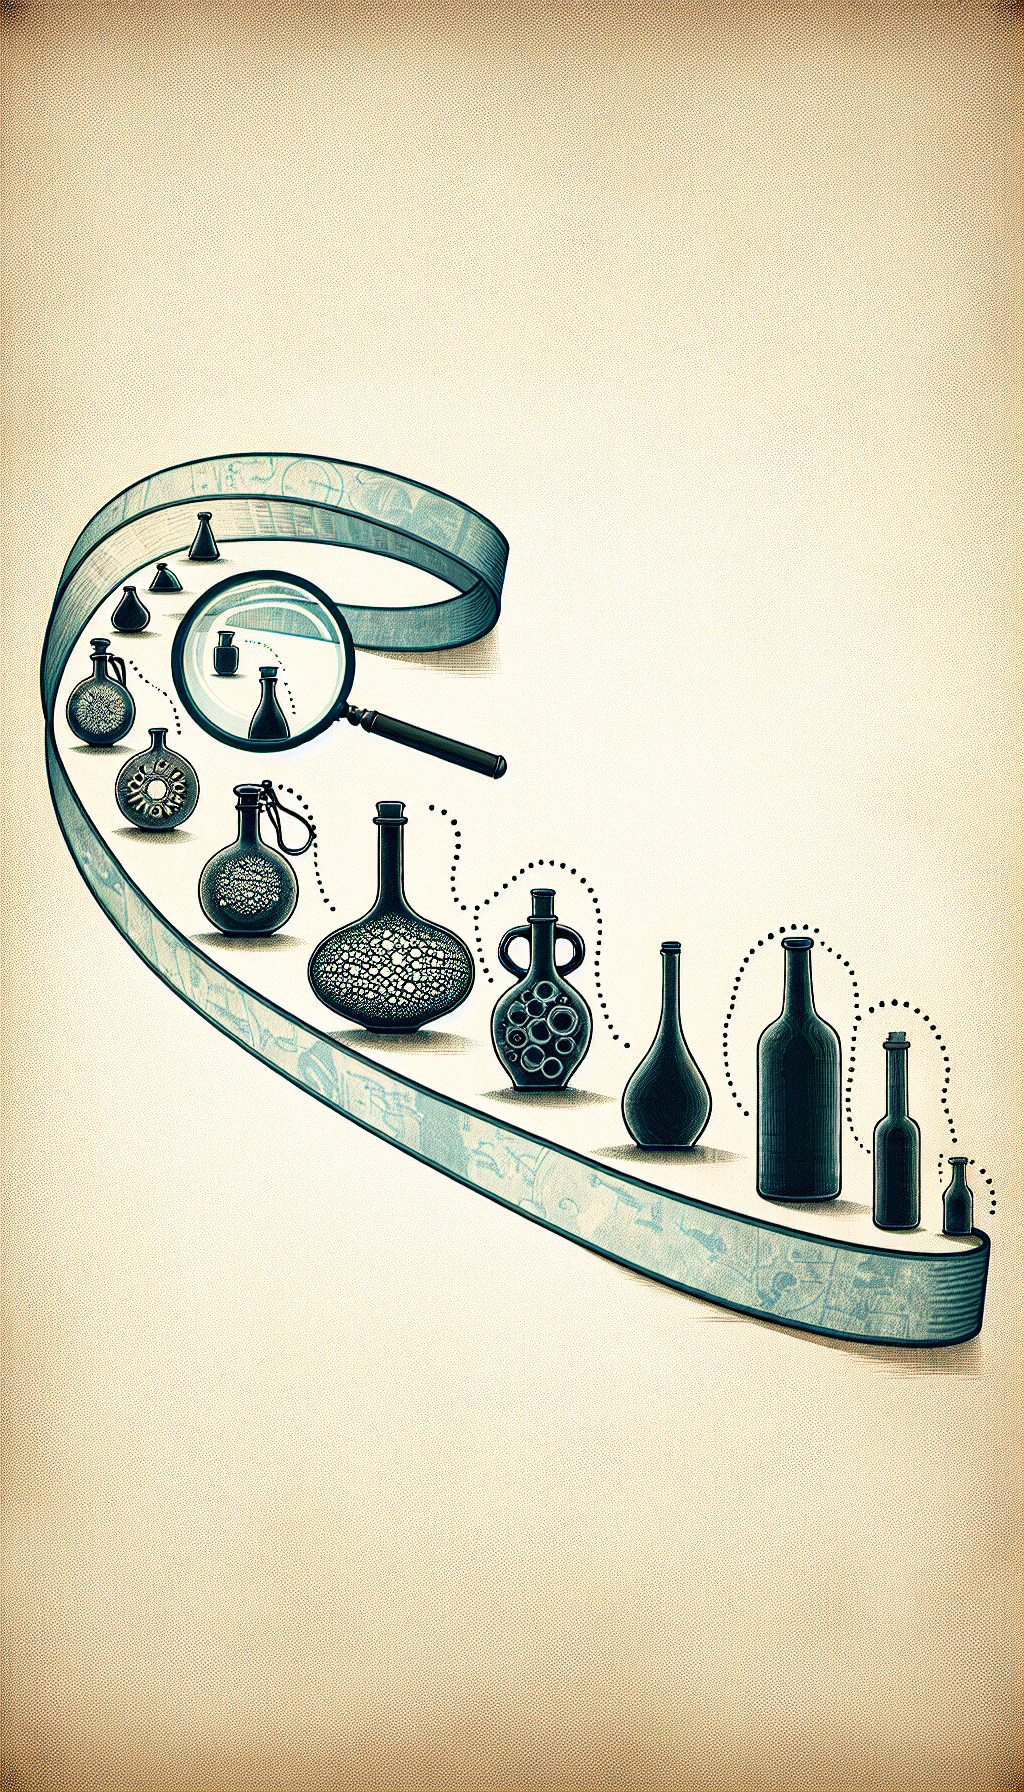 An illustration depicts a semi-transparent timeline ribbon twisting across the page, with a diverse array of bottle silhouettes transitioning from ancient amphoras to modern flasks embedded along its path. Interspersed magnifying glasses focus on key features, highlighting the evolution of form and function critical for antique bottle identification, while dotted lines connect shapes to era-specific cultural symbols.